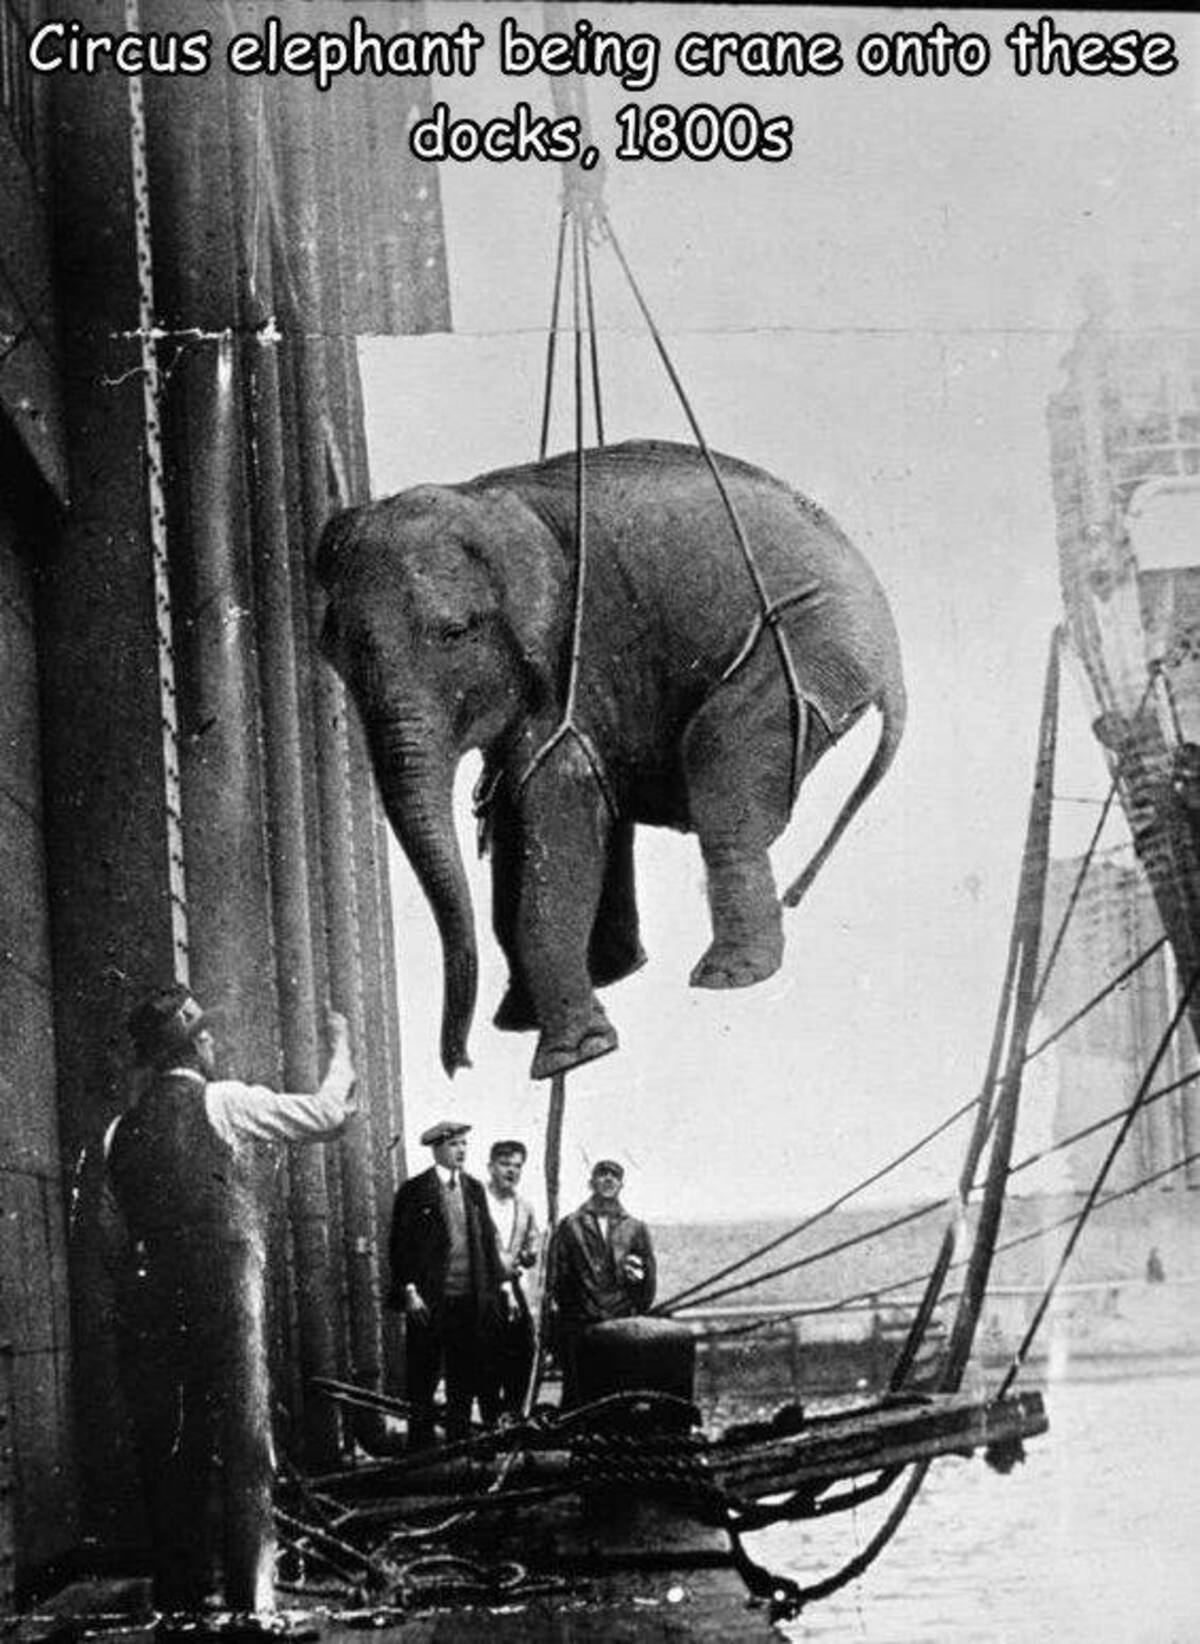 old circus - Circus elephant being crane onto these docks, 1800s